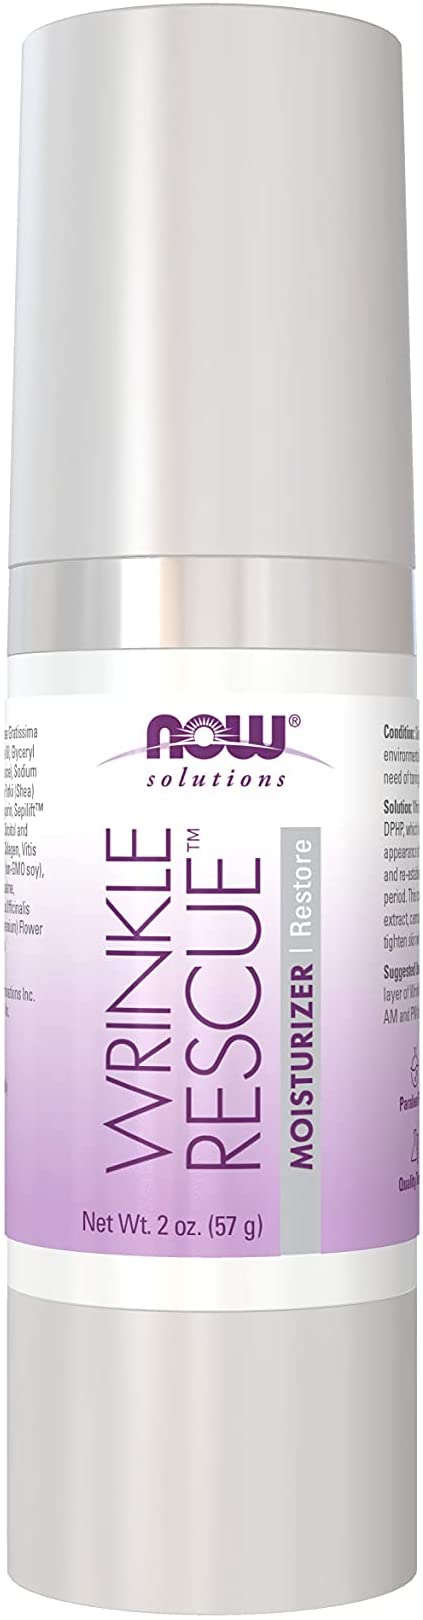 NOW Solutions, Wrinkle Rescue Moisturizer, with Clinically Tested Sepilift DPHP and Lanablue to Tone Aging Skin, 2-Ounce